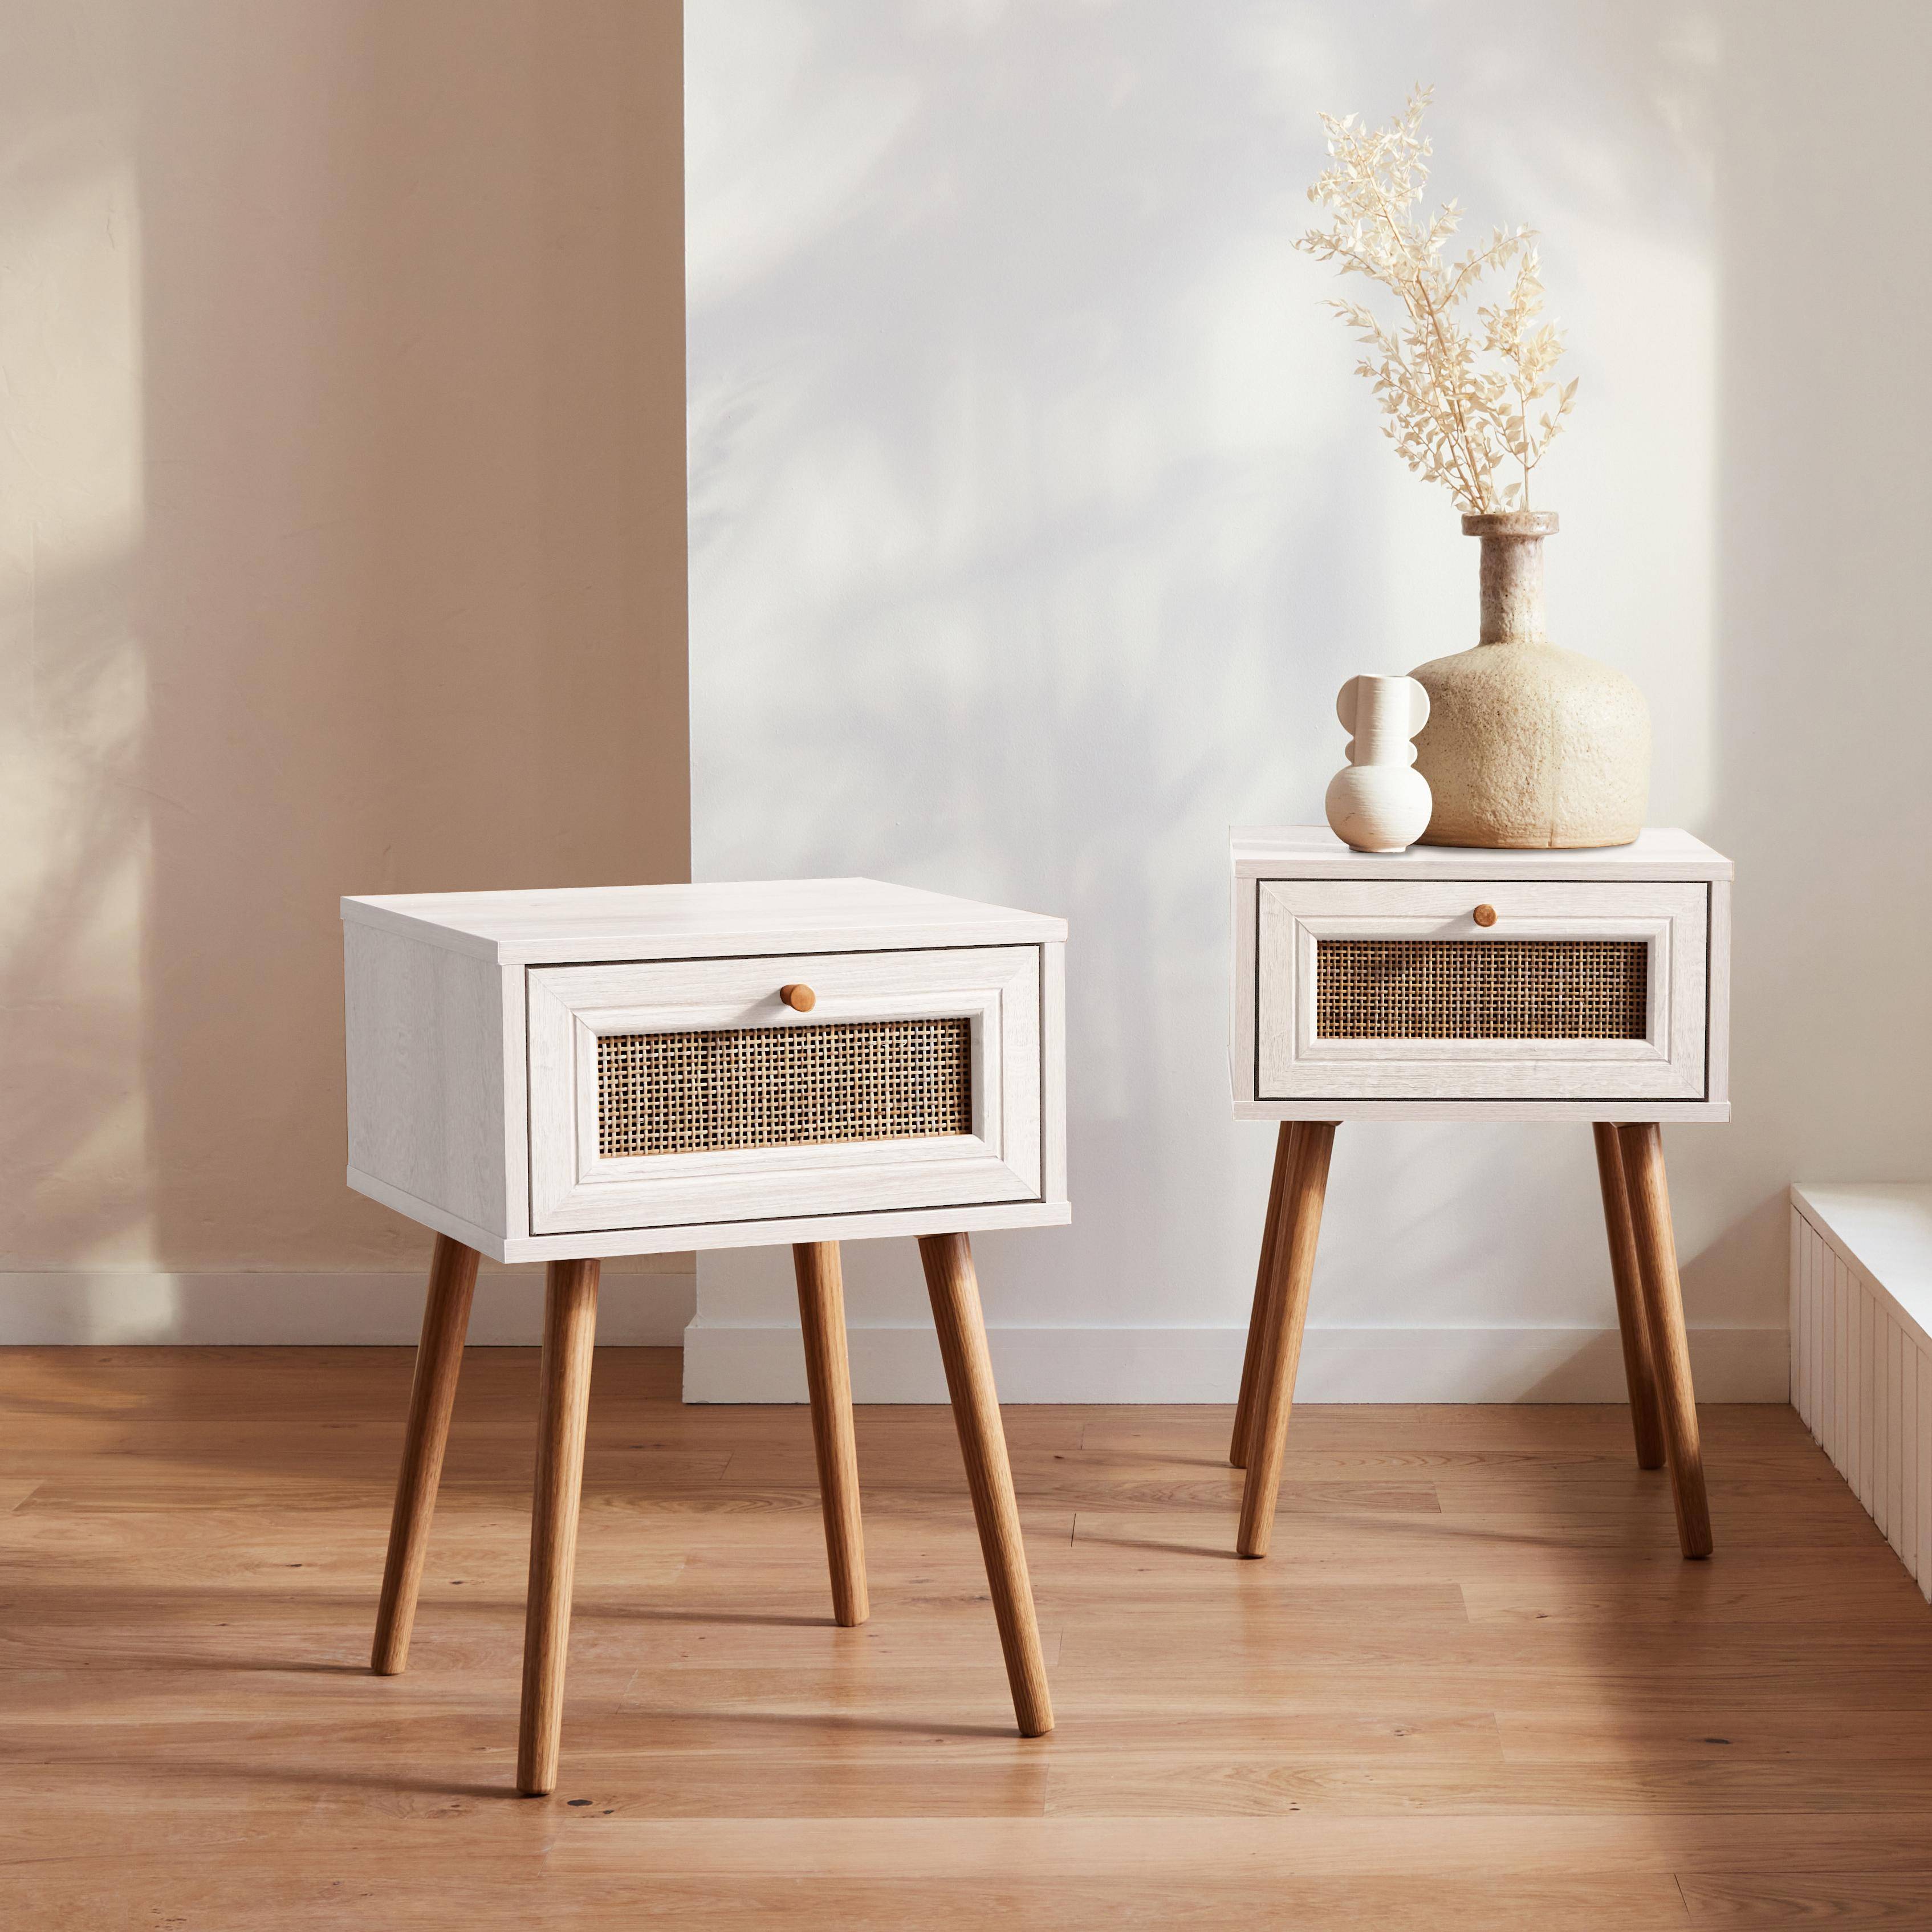 Set of 2 white wood and cane effect bedside tables with 1 drawer Photo1